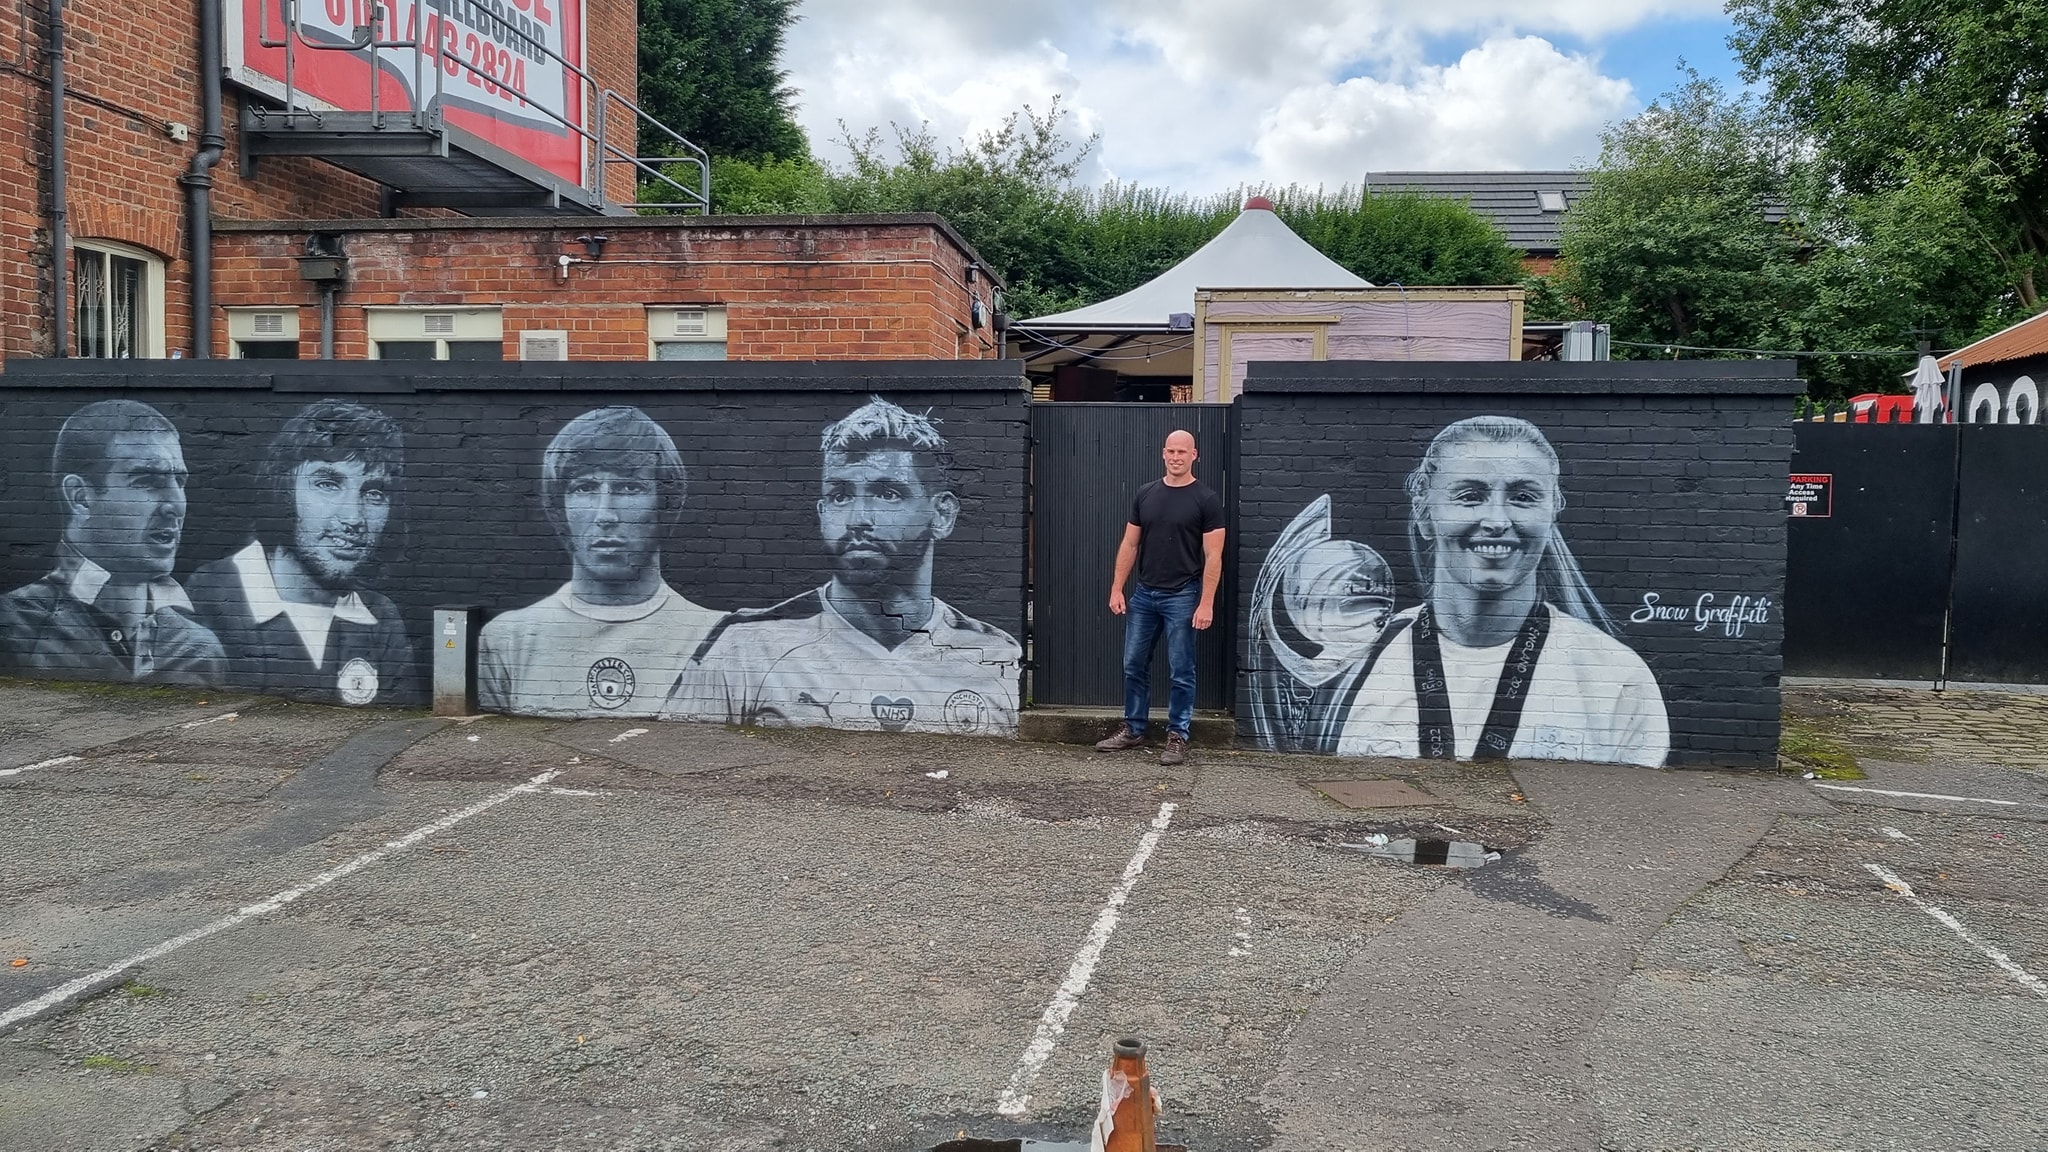 Scott Wilcock with his football icons mural for a pub in Prestwich, Manchester. 